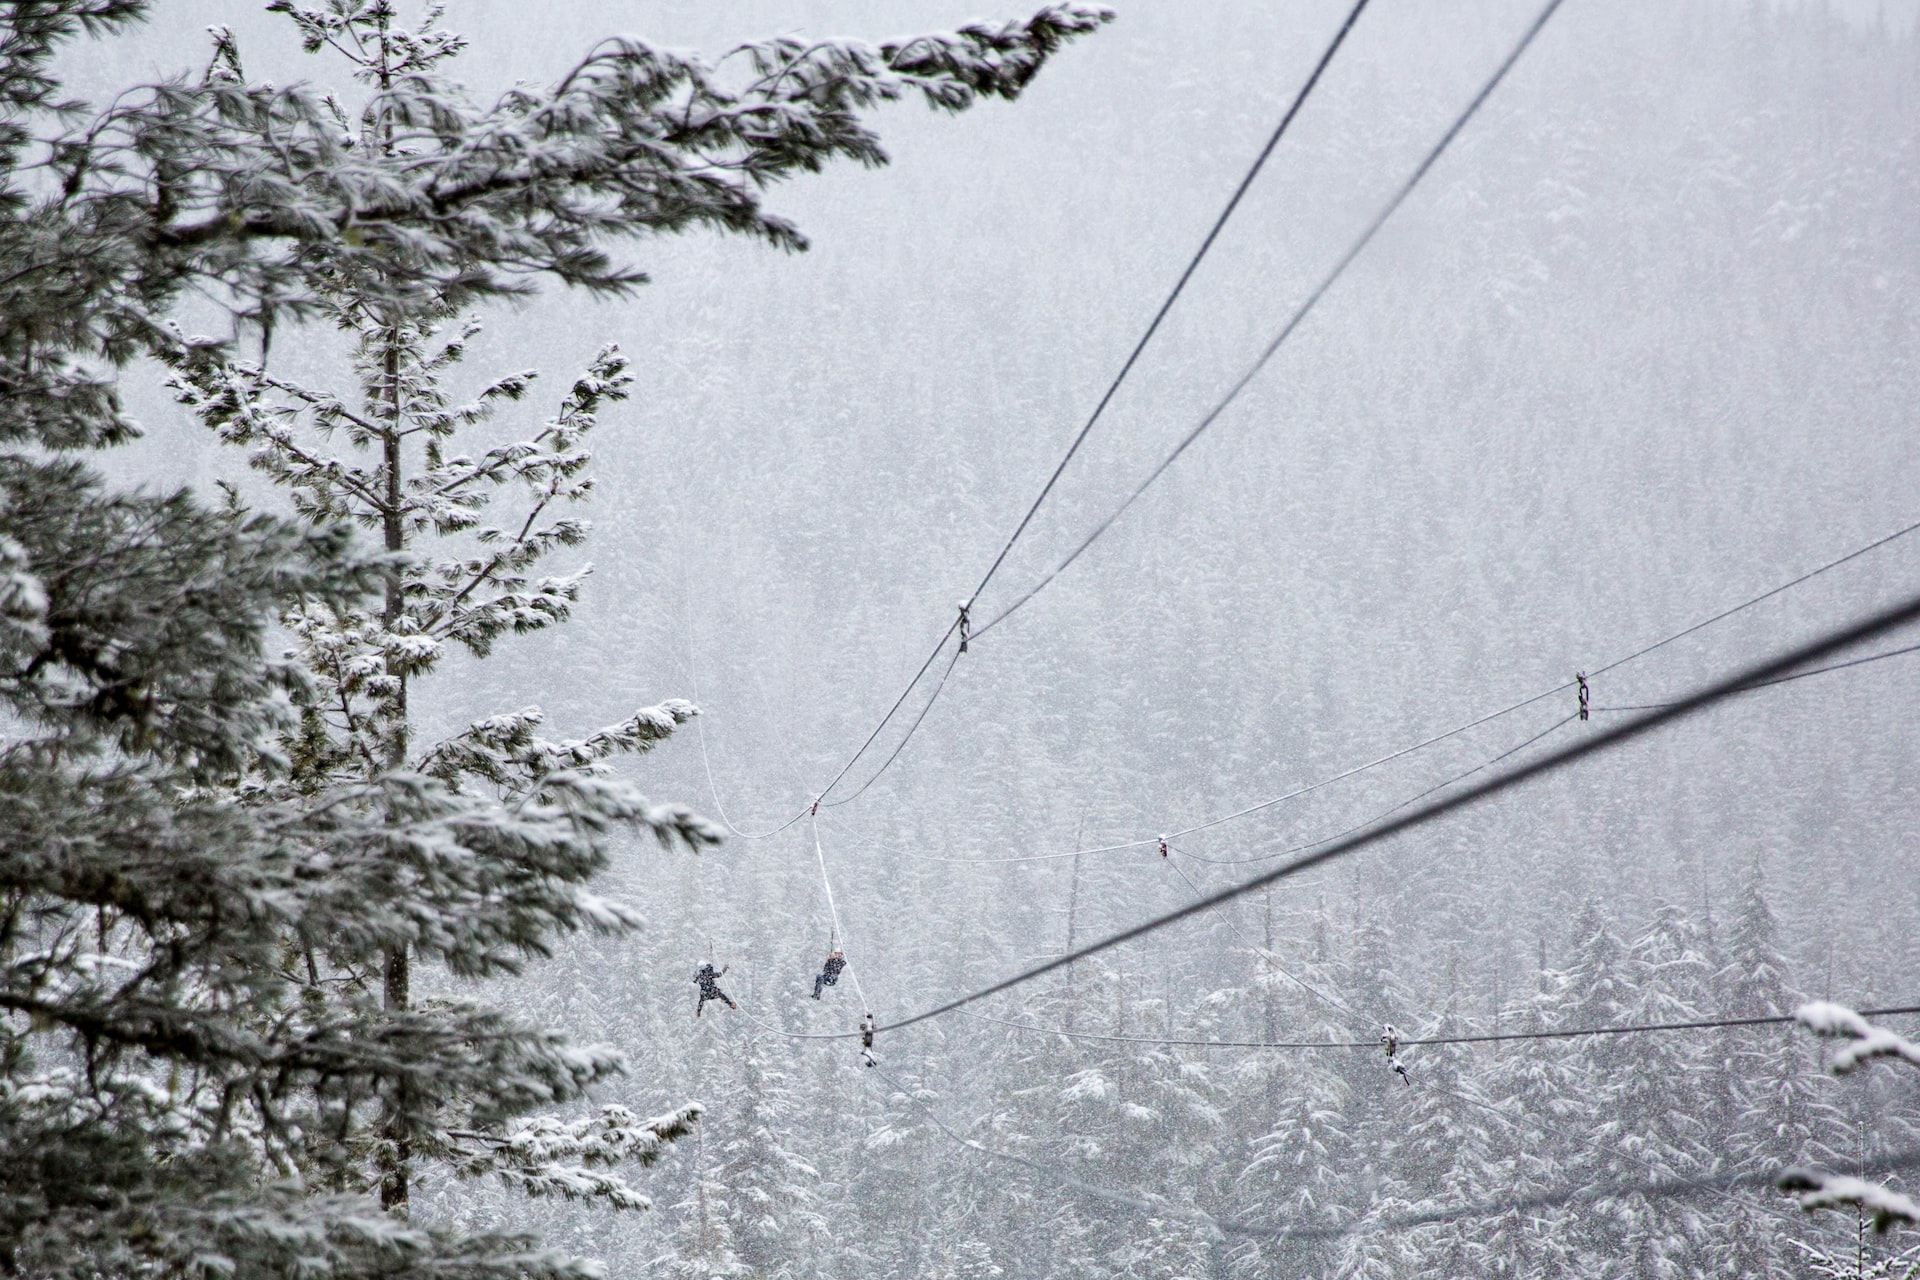 Two people zip lining in the winter.